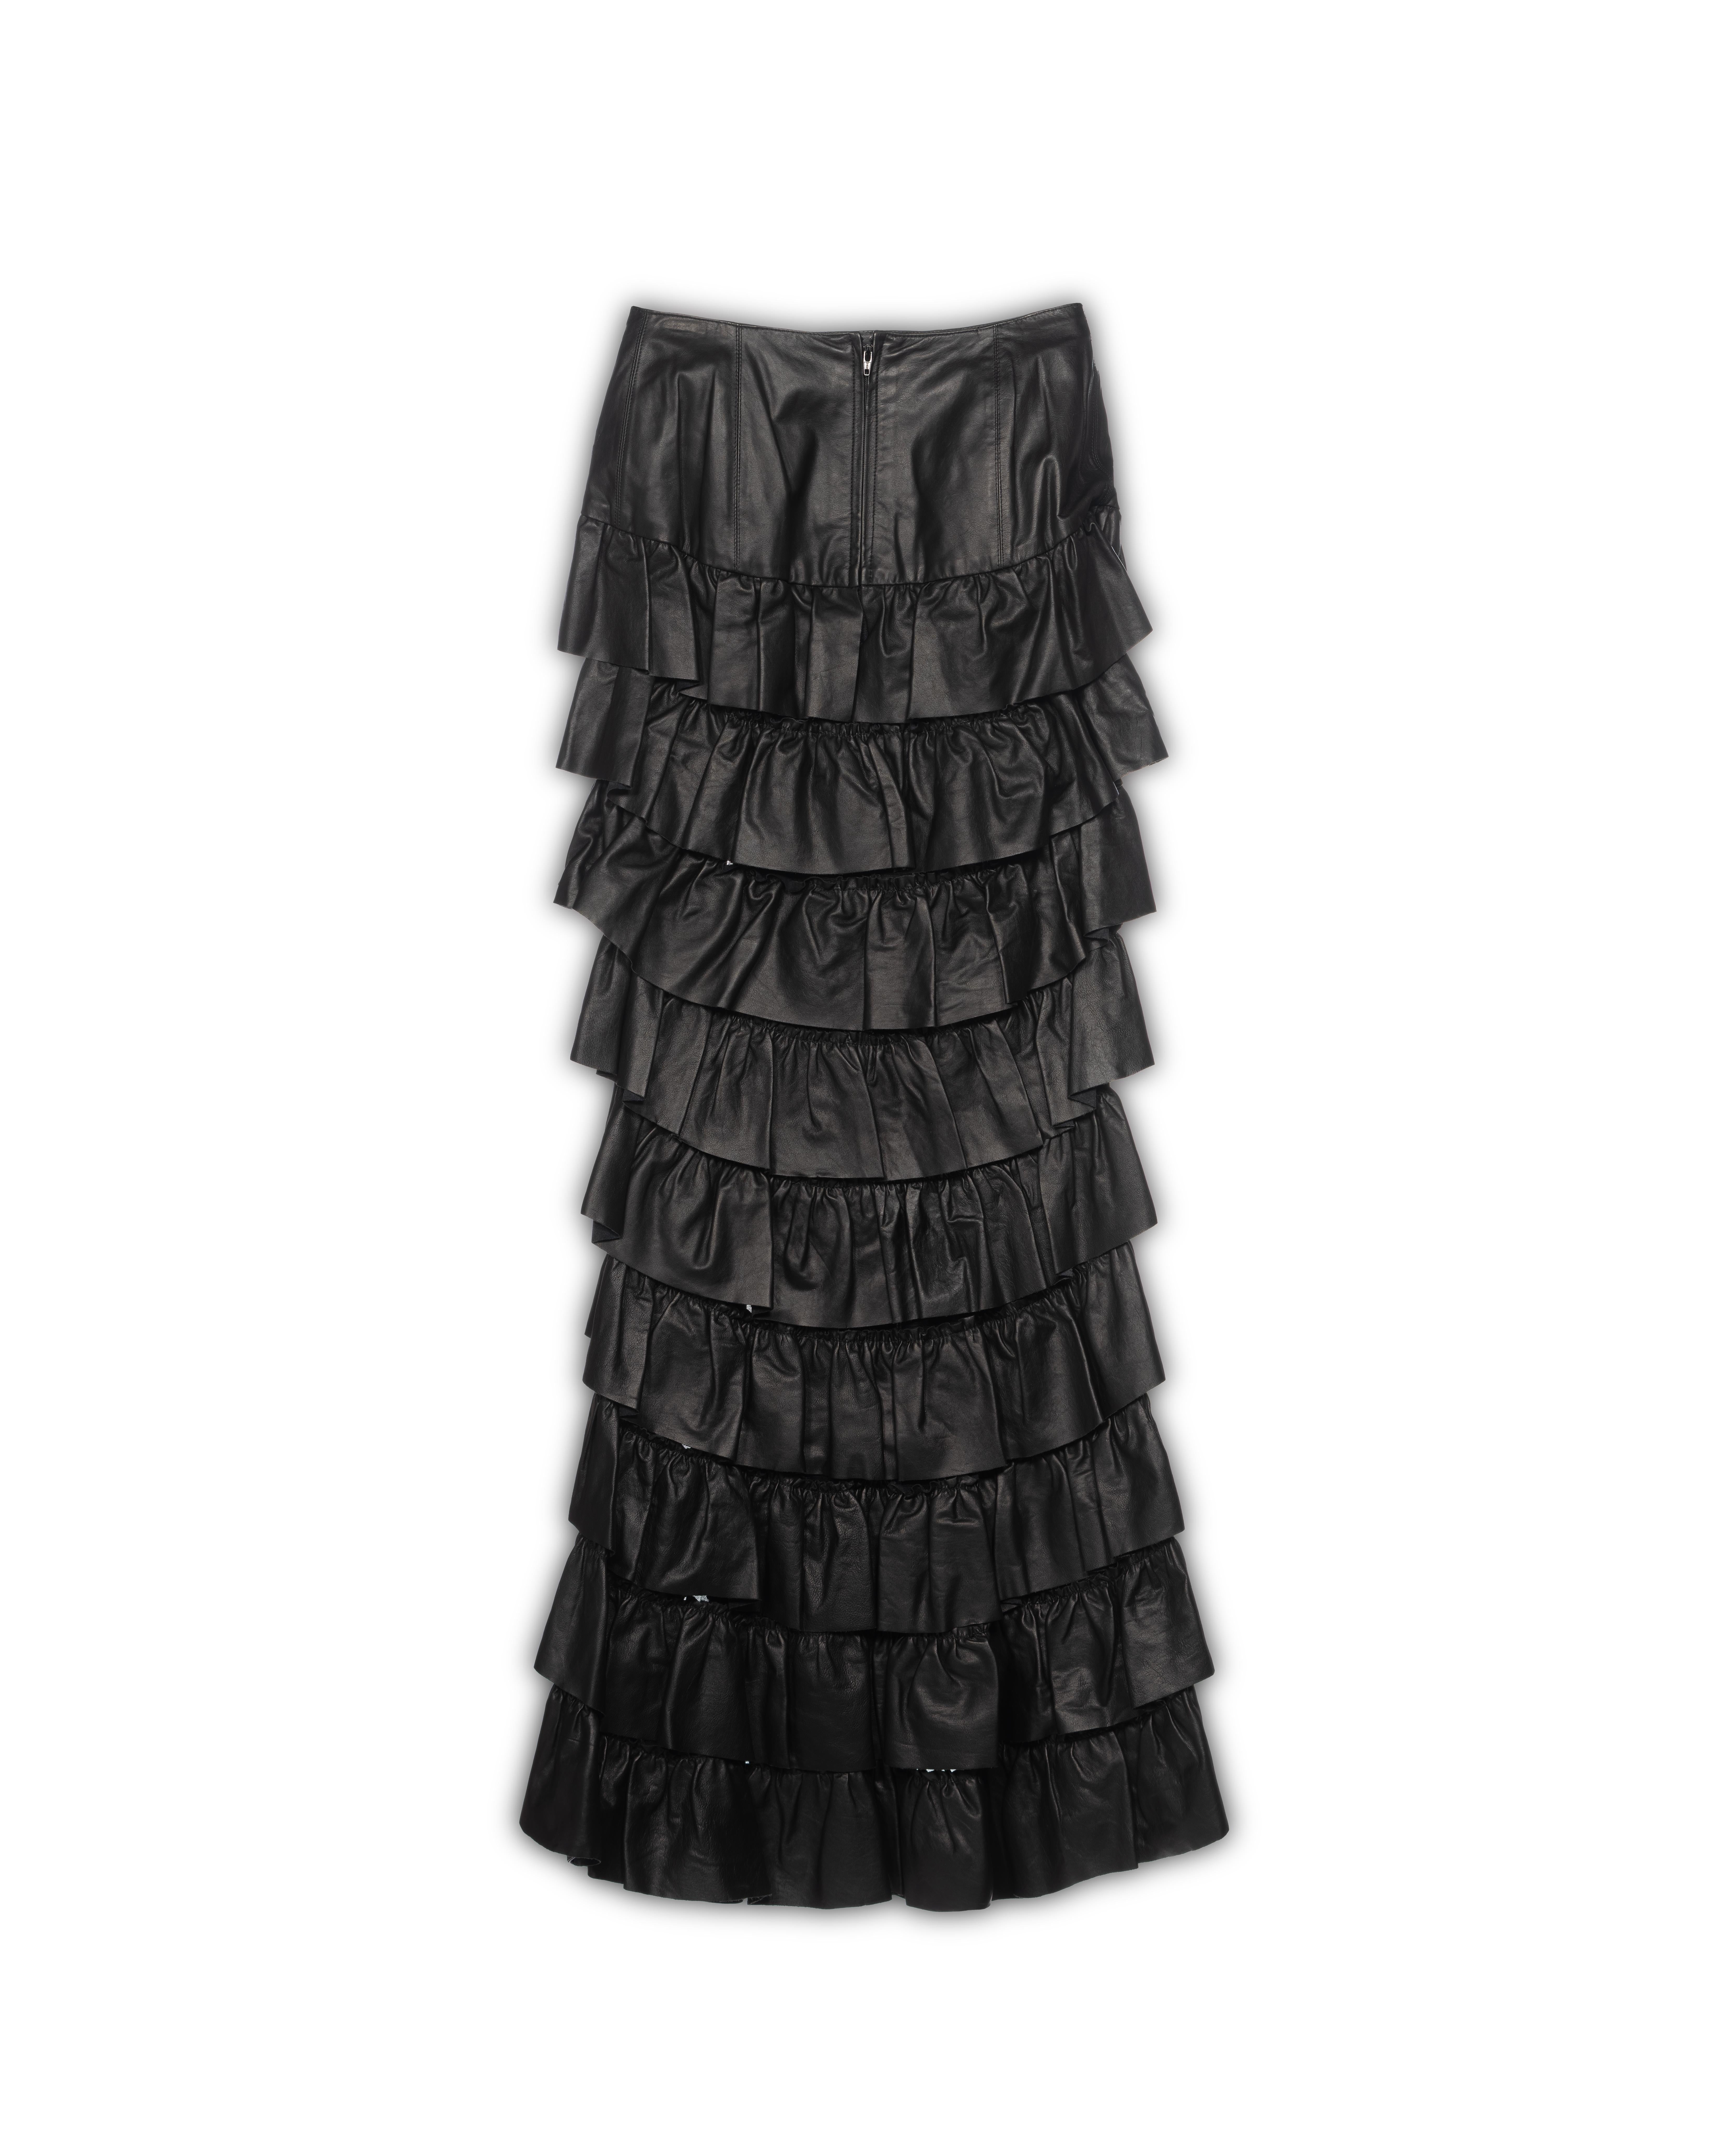 Chanel by Karl Lagerfeld Black Leather Tiered Ruffled Maxi Skirt, FW 2001 In Good Condition For Sale In London, GB